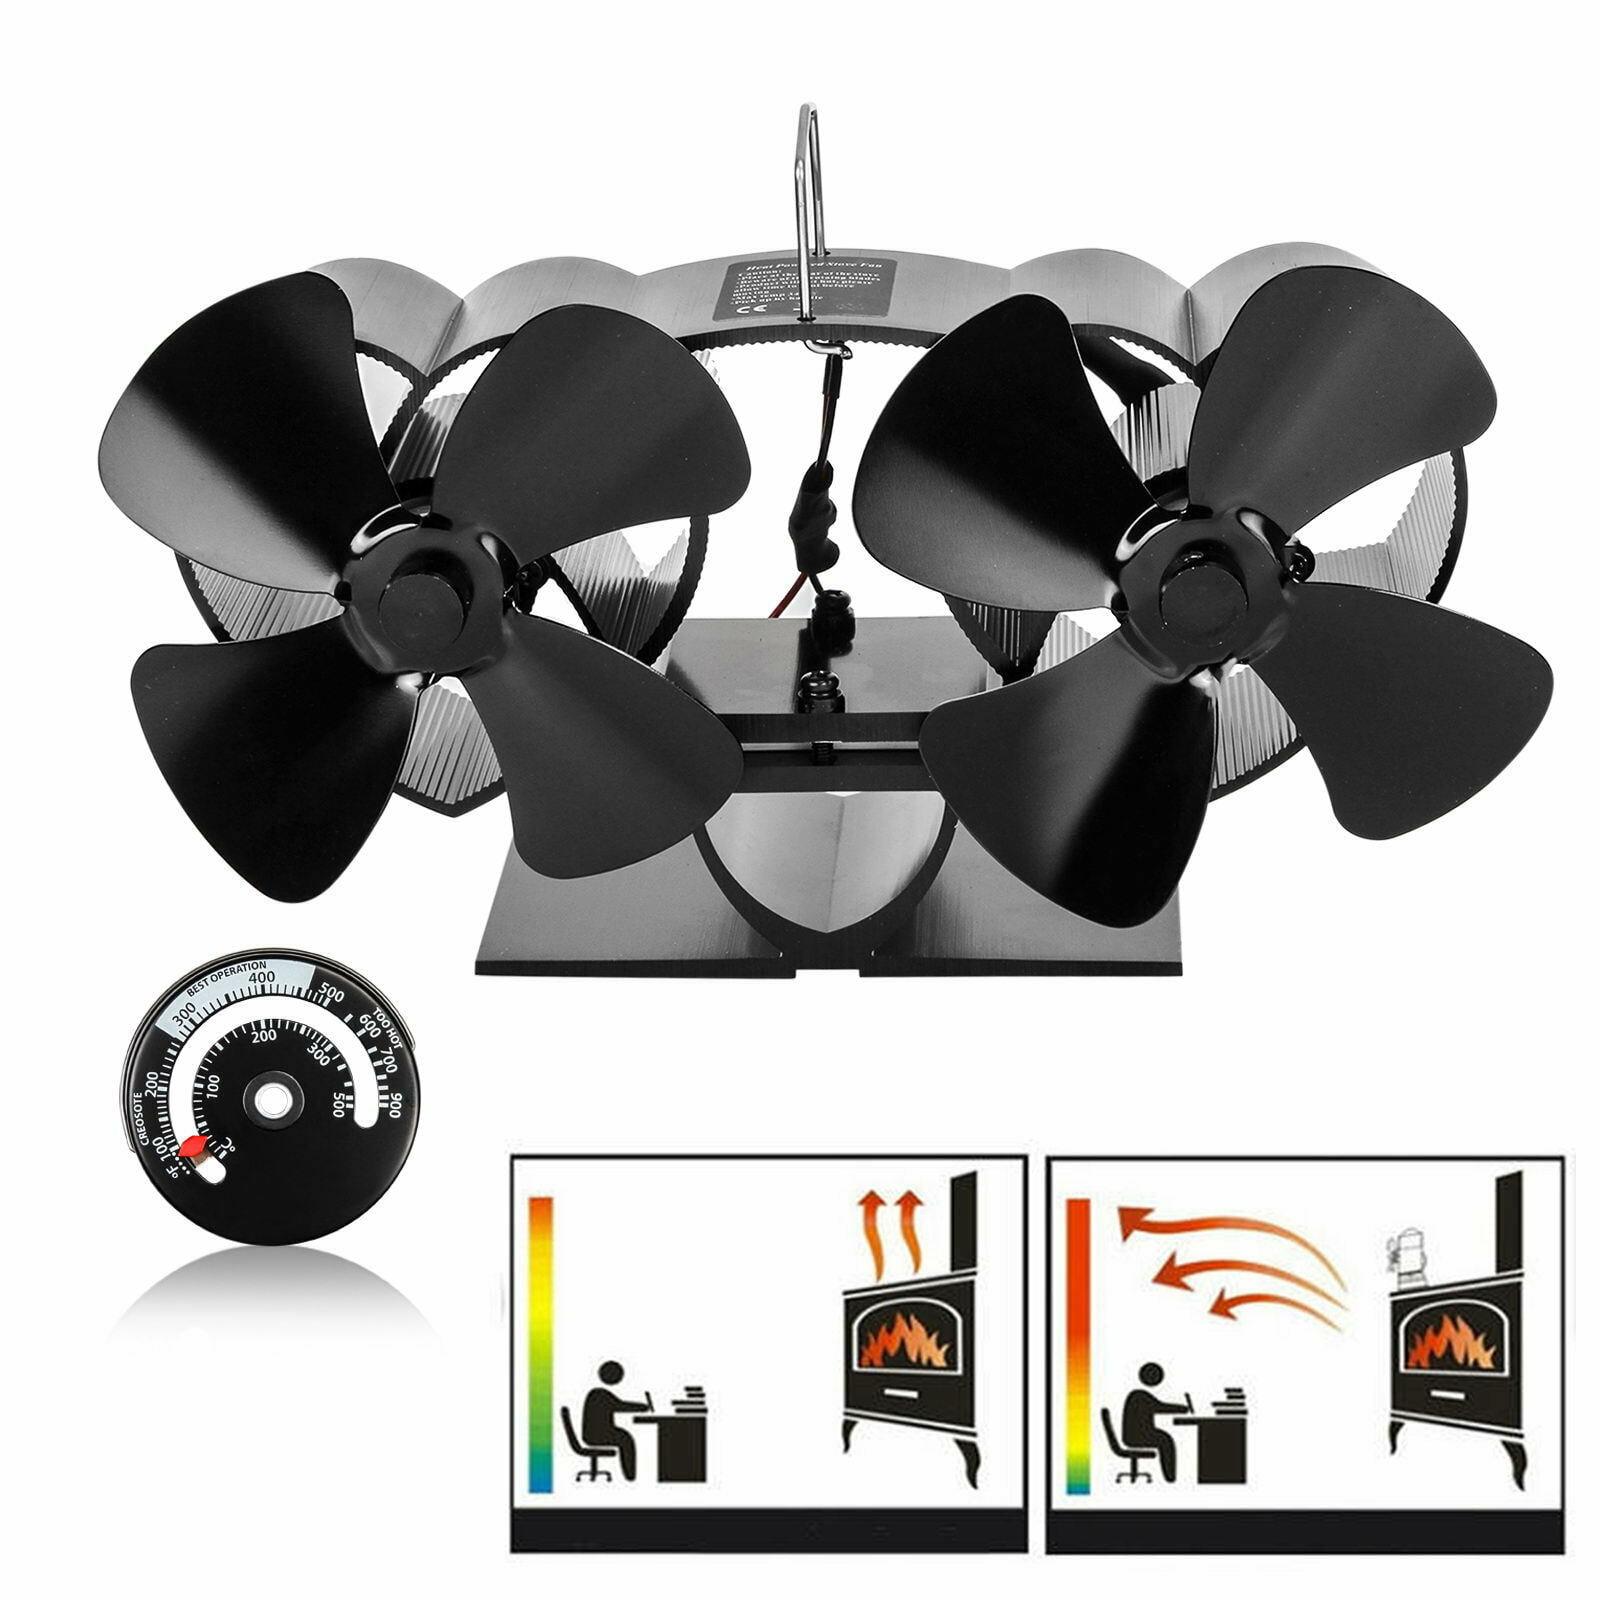 Details about   8 Blades Fireplace Fan Double Heads Motor Heat Powered Wood Stove Burner Black 